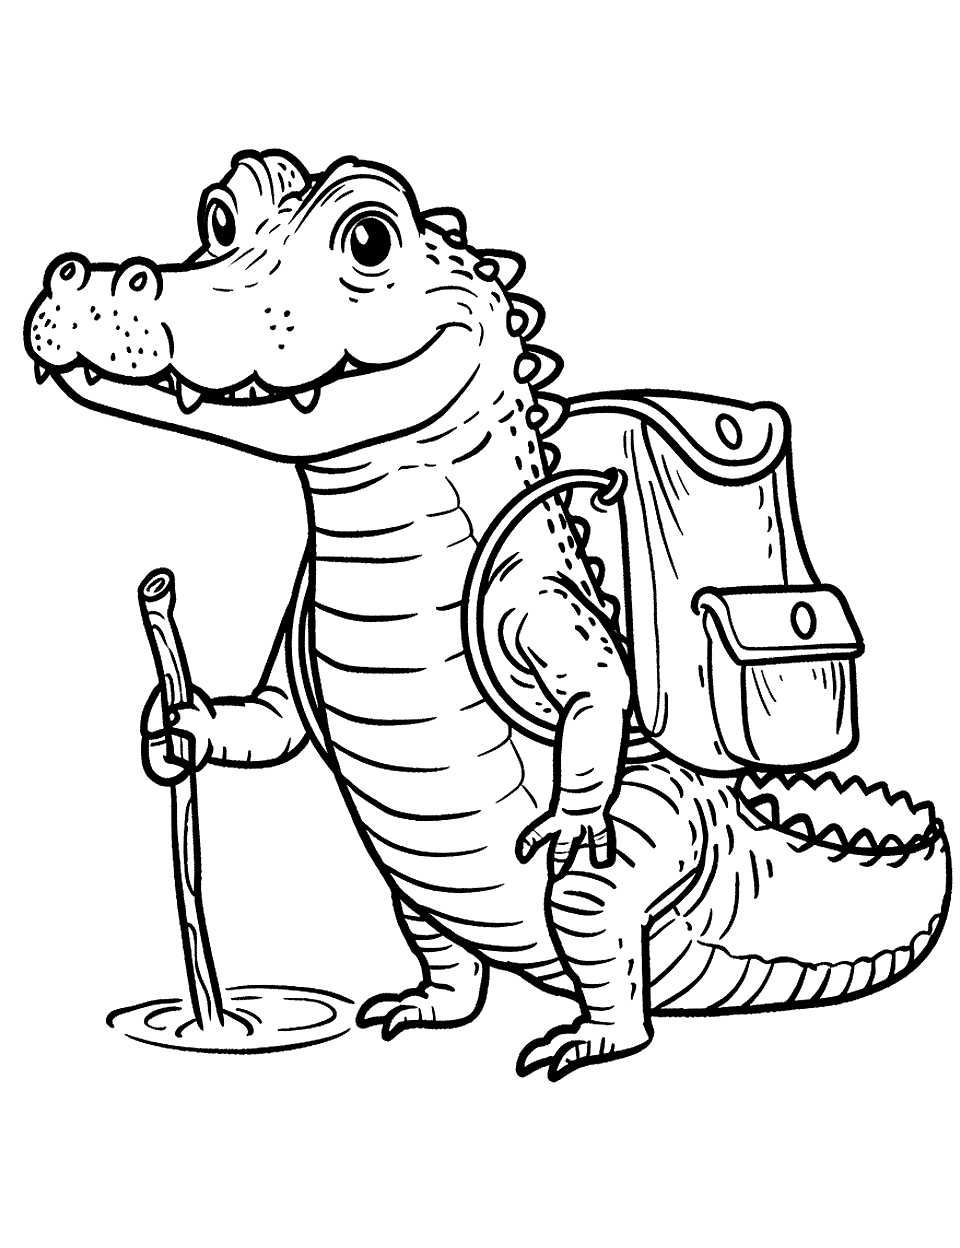 Alligator with a Backpack Coloring Page - An alligator hiking with a backpack and a walking stick.